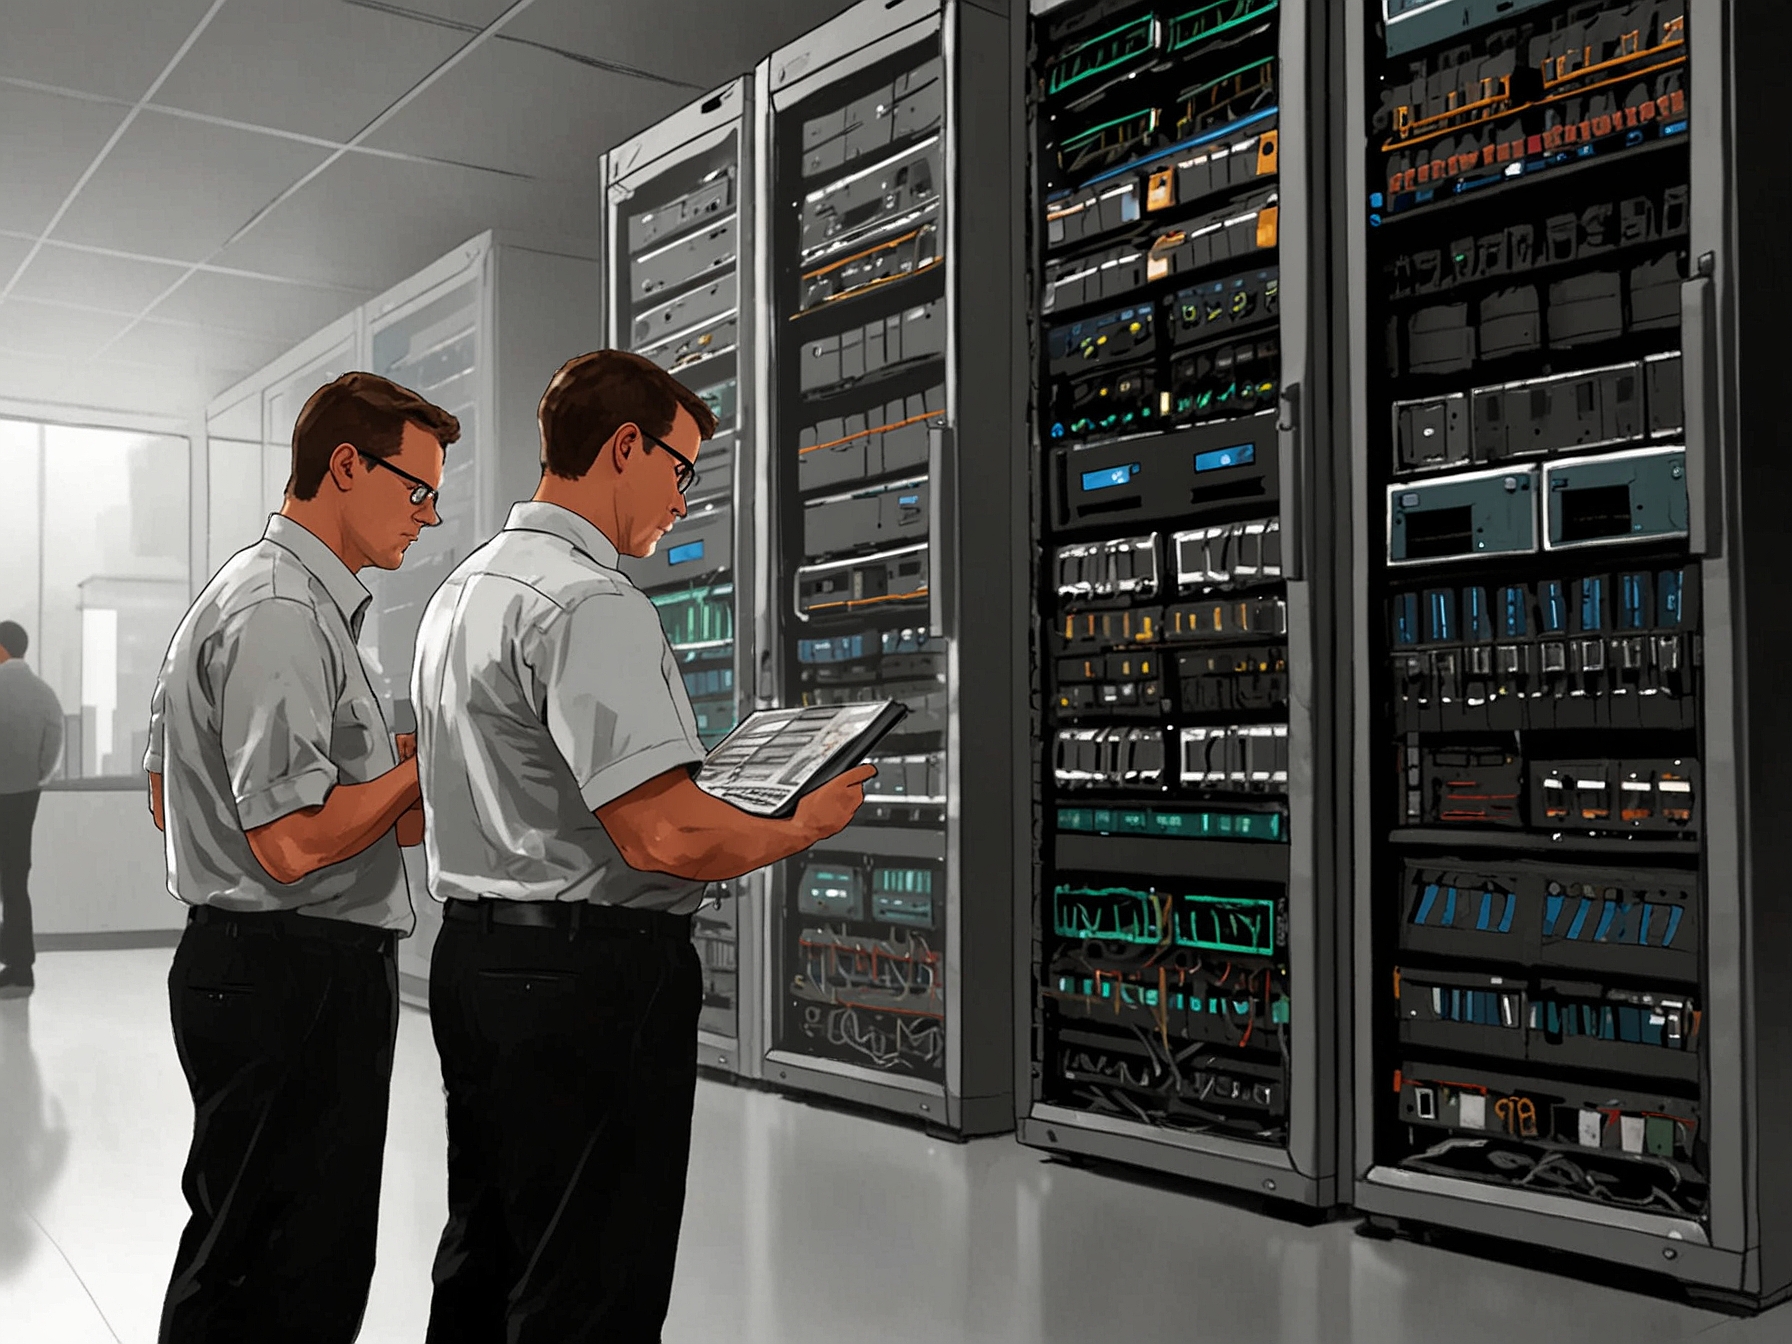 Technicians inspecting server racks and IT infrastructure, emphasizing the importance of disaster recovery plans and robust digital systems for car dealerships.